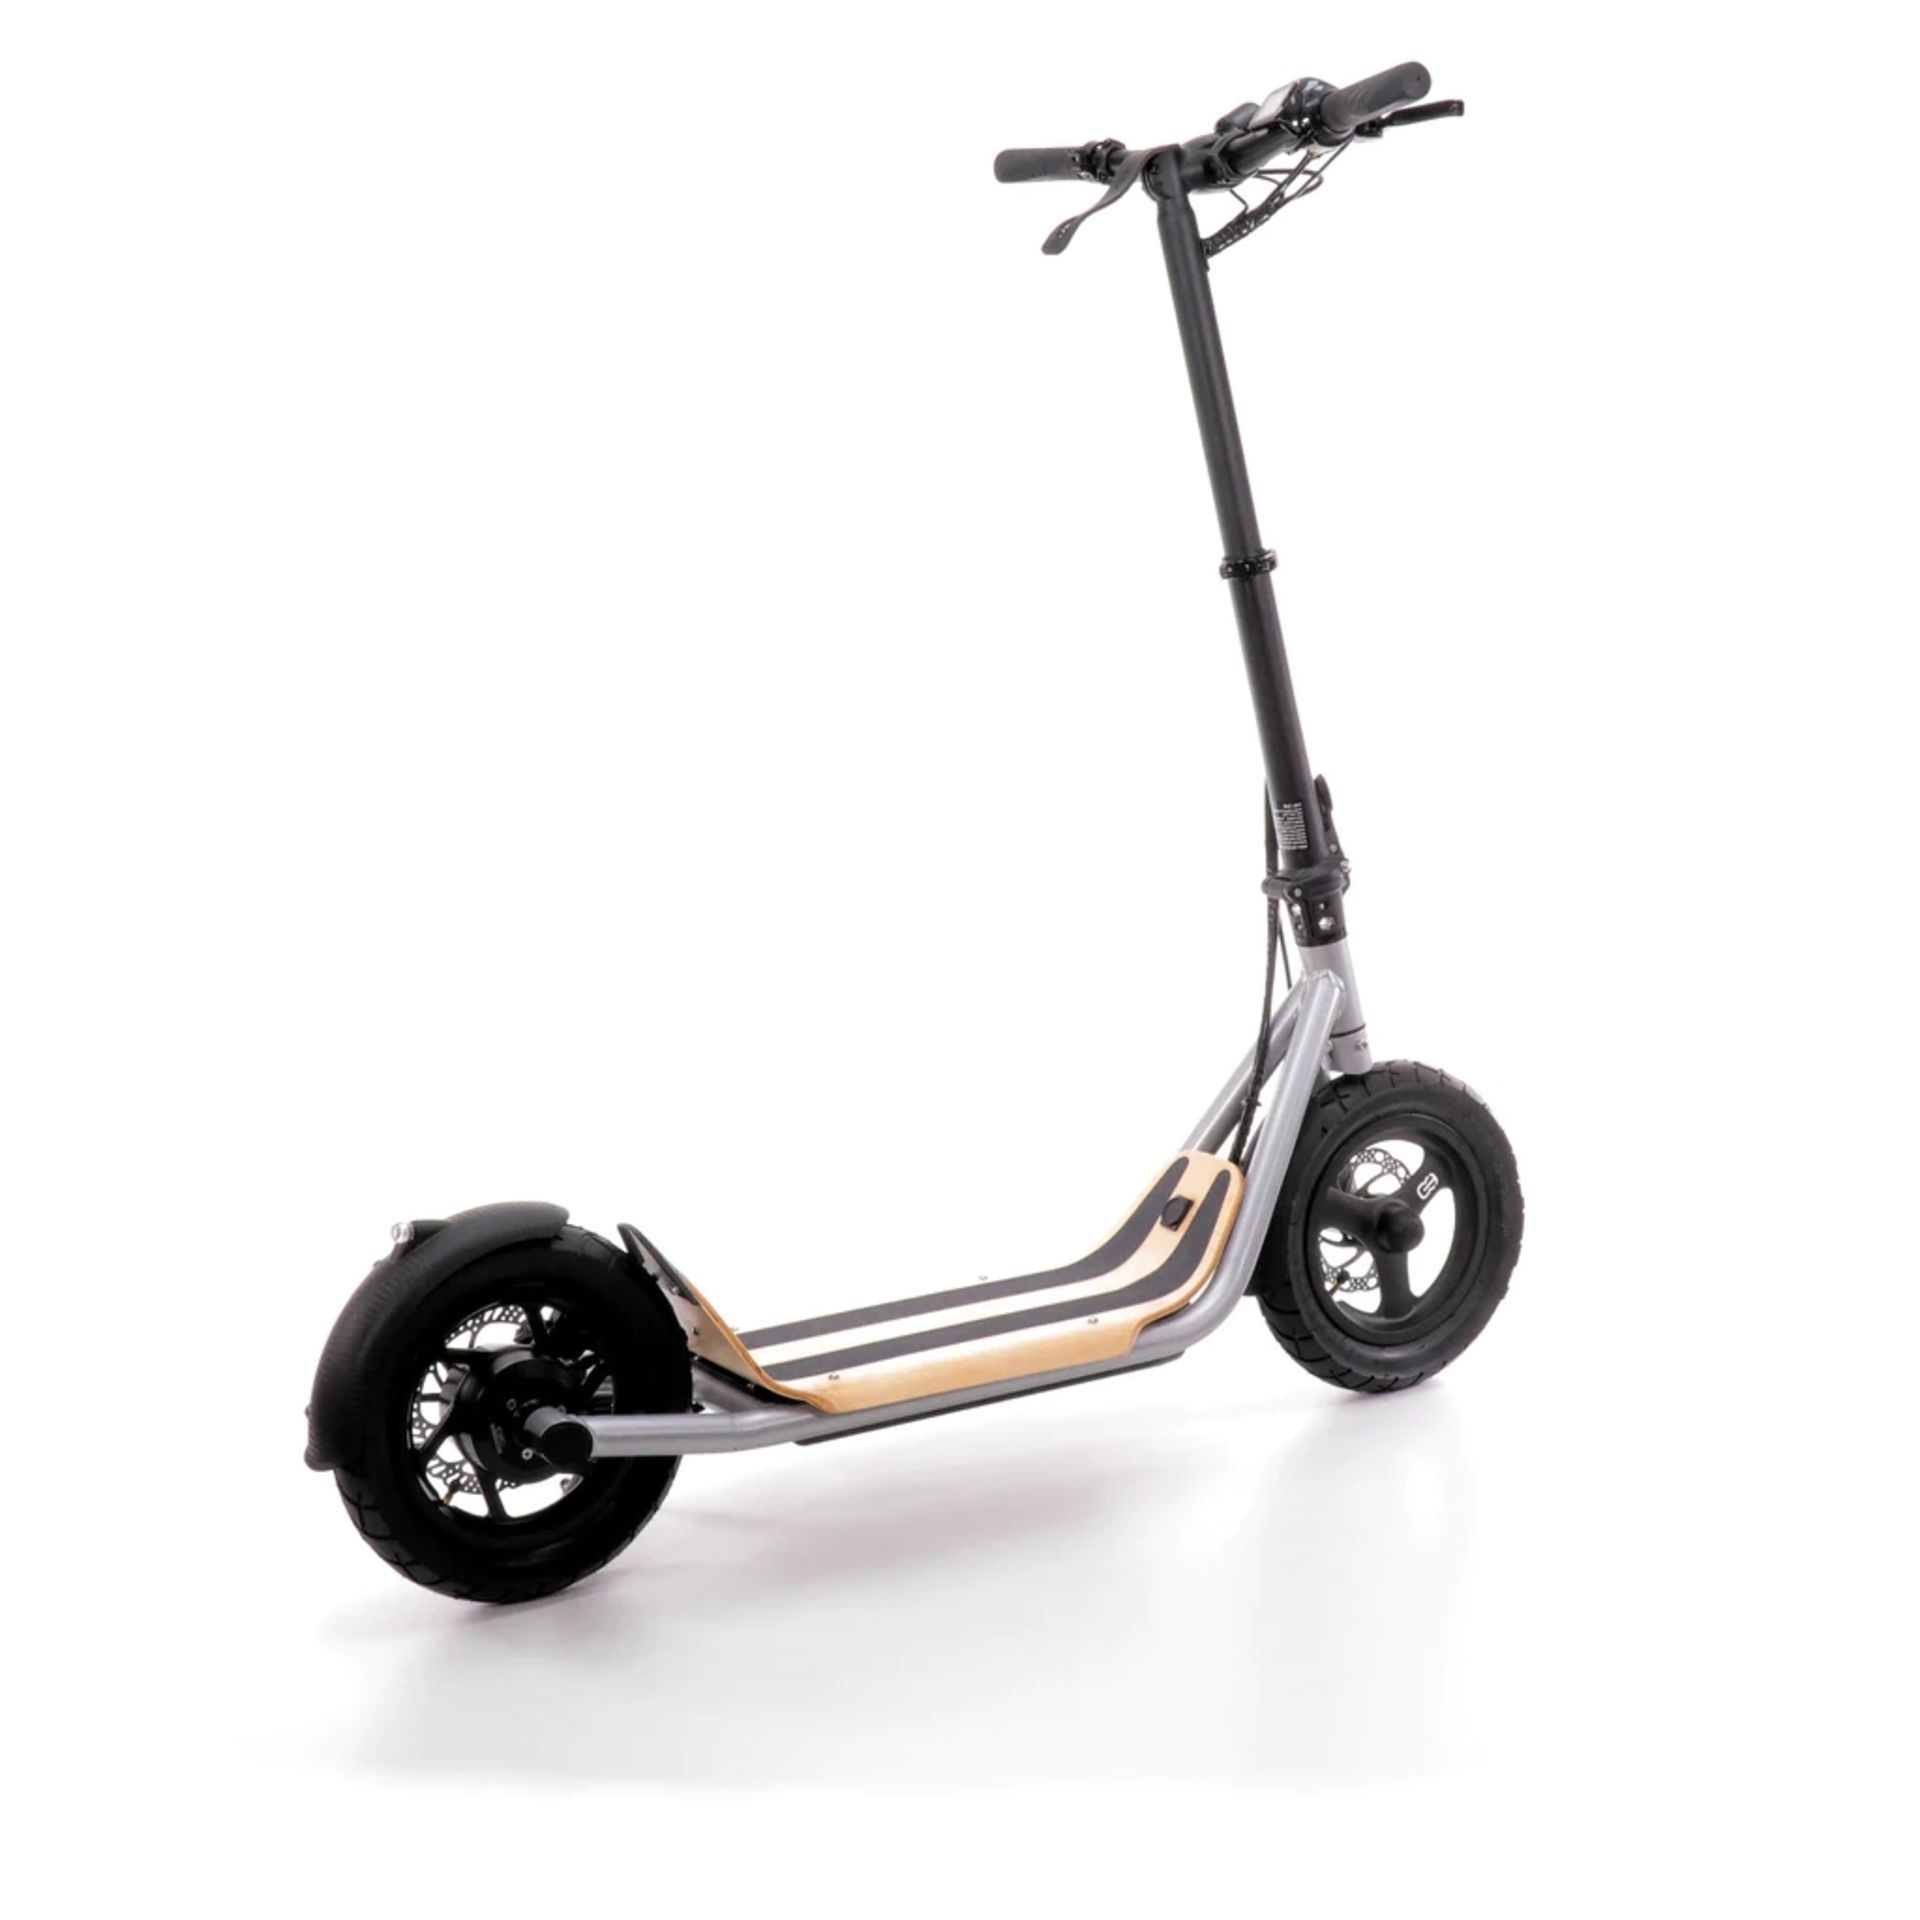 BRAND NEW 8TEV B12 PROXI CLASSIC ELECTRIC SCOOTER SILVER RRP £1299, Perfect city commuter vehicle - Bild 2 aus 2